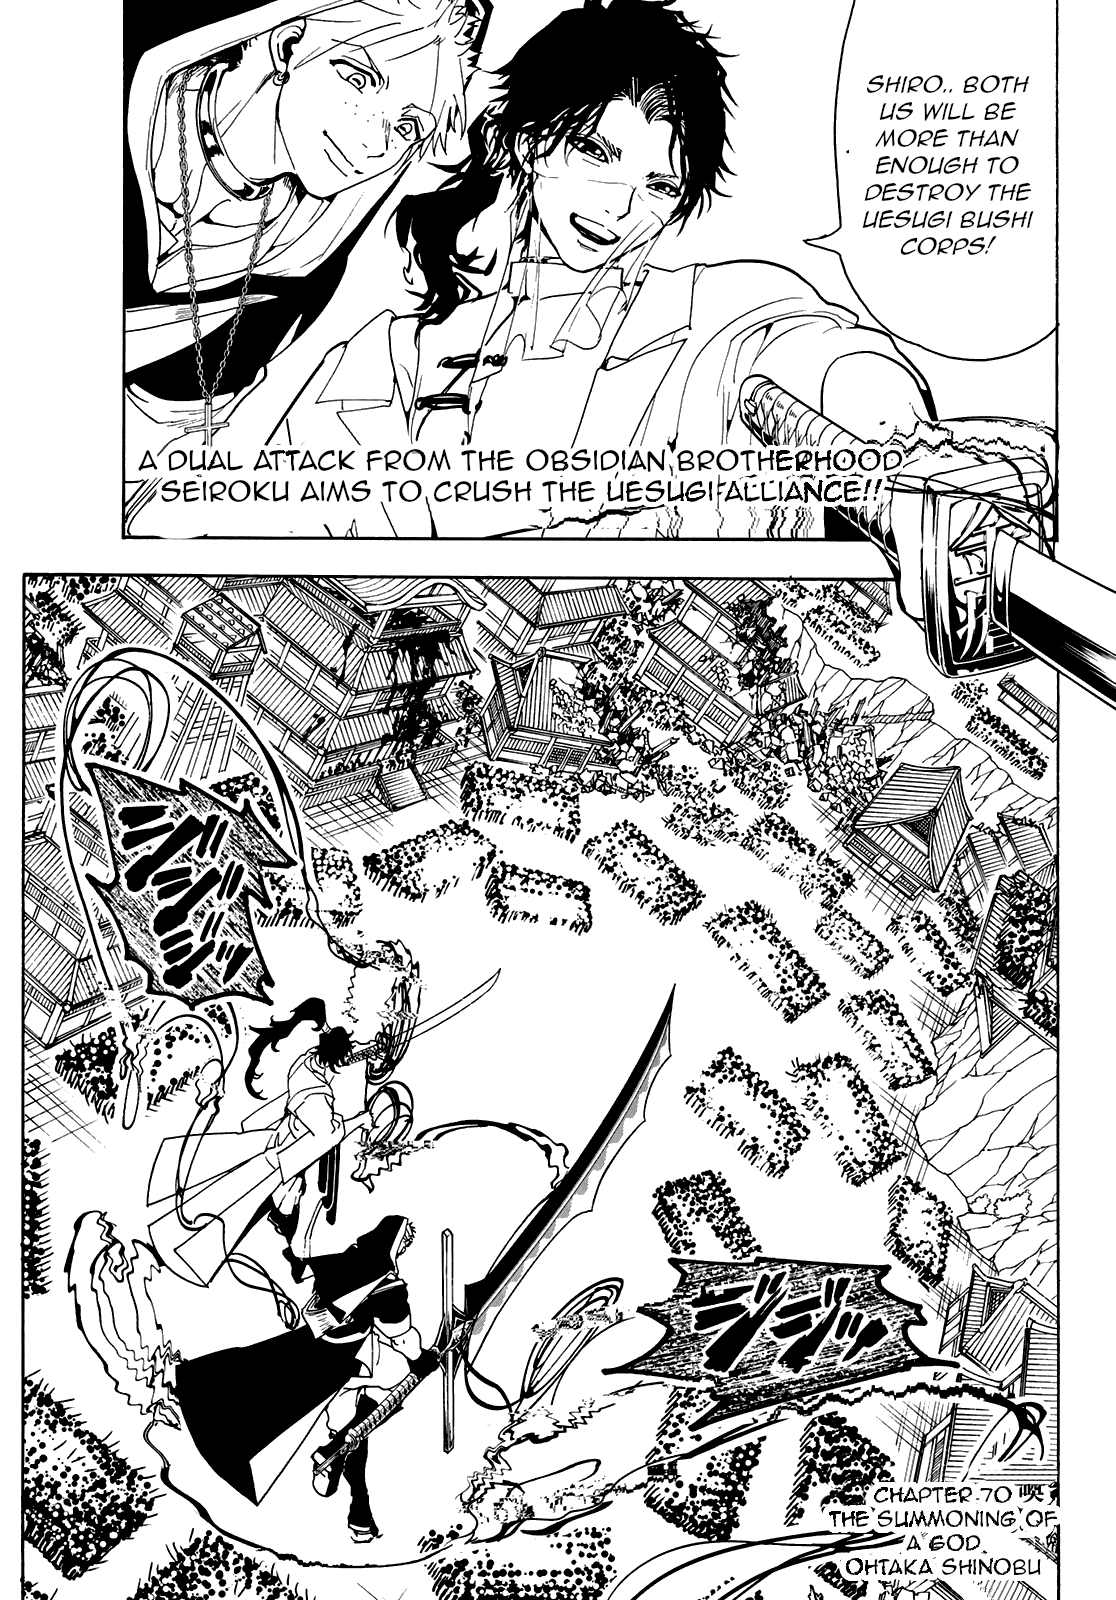 Orient Vol. 8 Ch. 70 The Summoning of a God